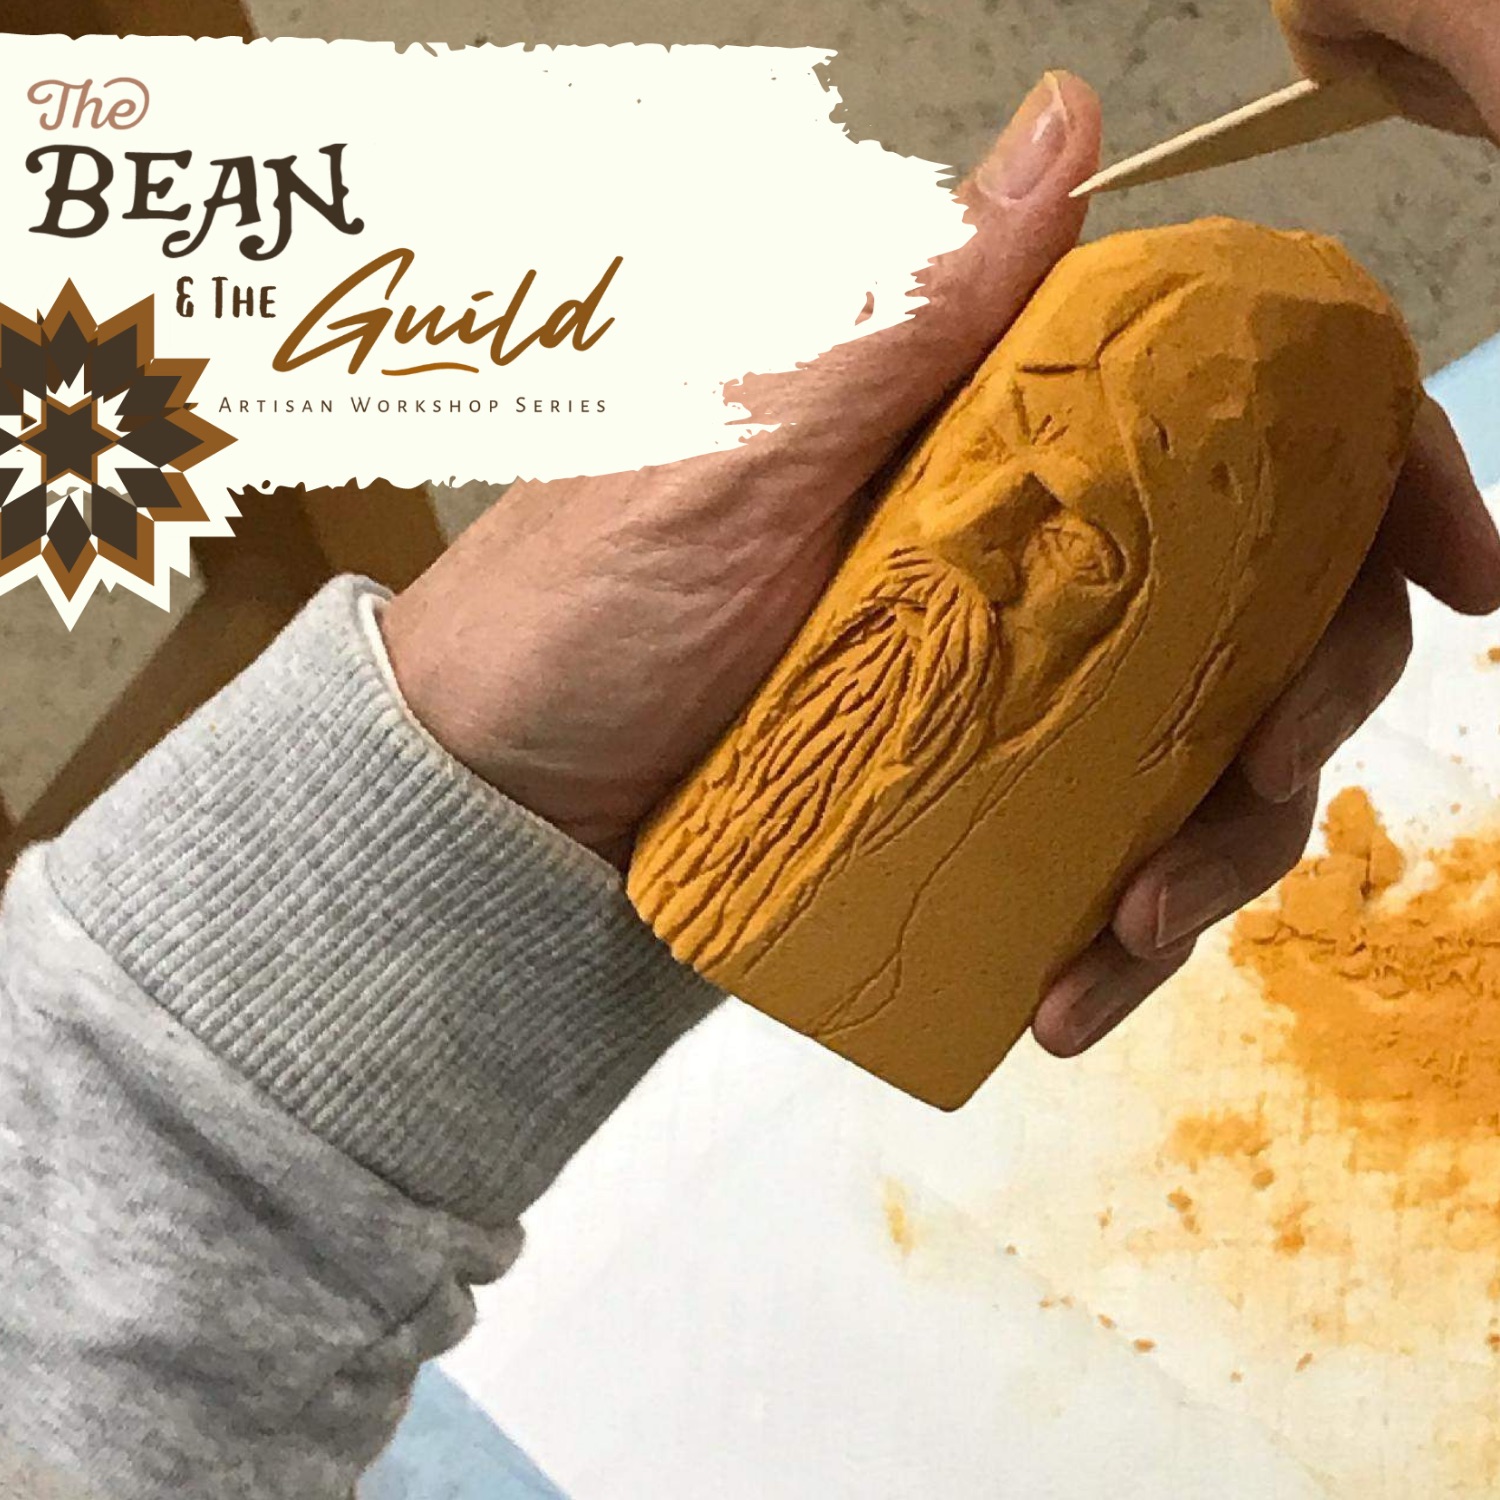 The Bean and the Guild Artisan Workshop